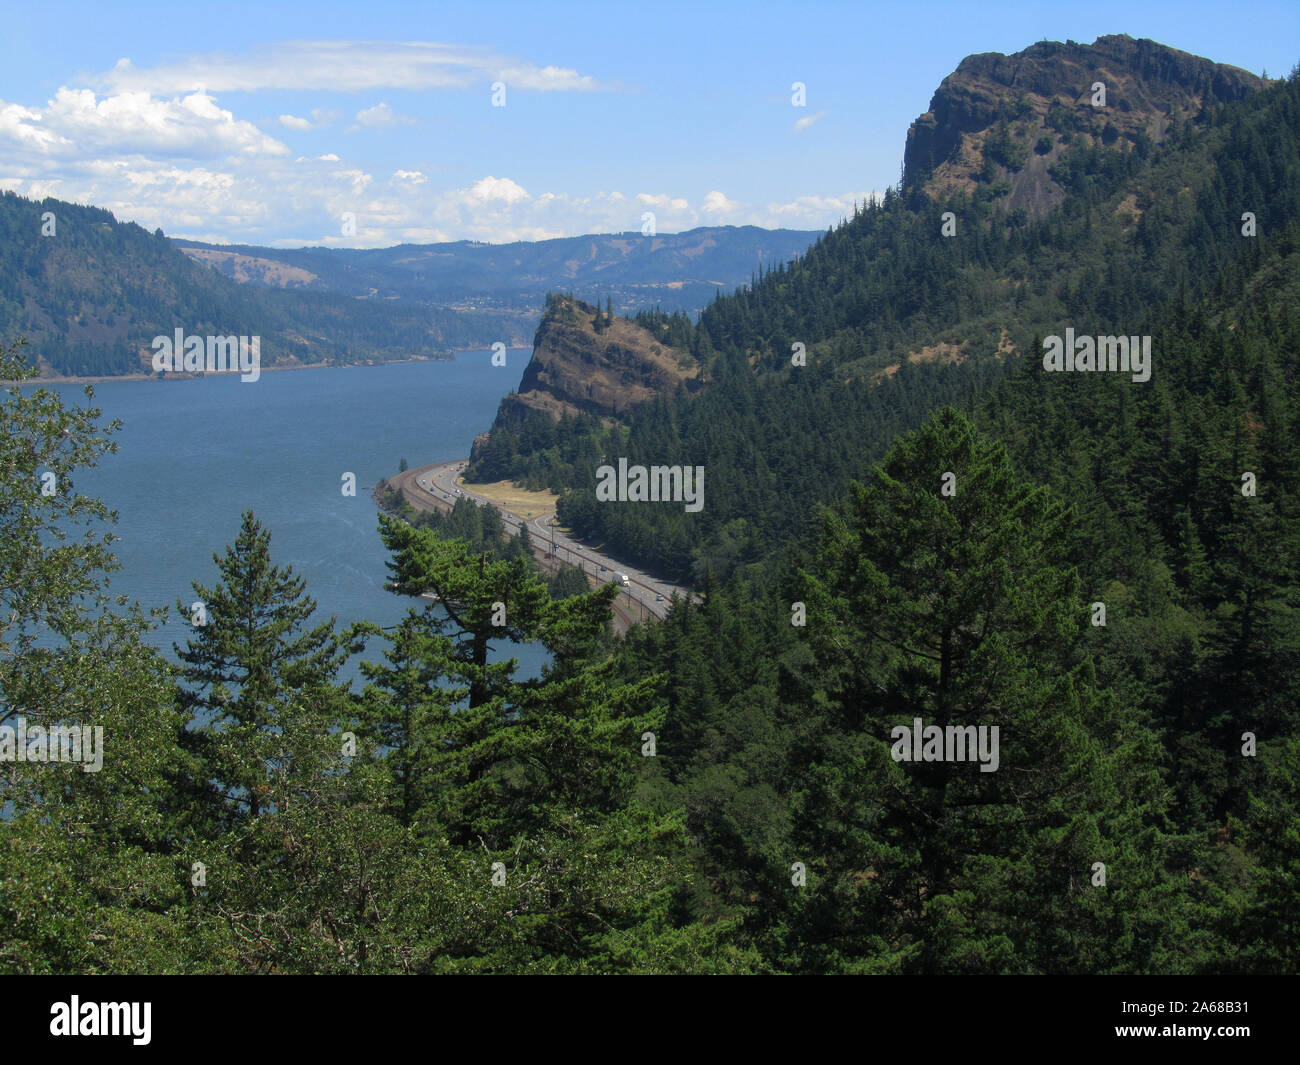 A view of Mitchell Point located on the Oregon side of the Columbia River Gorge. Stock Photo